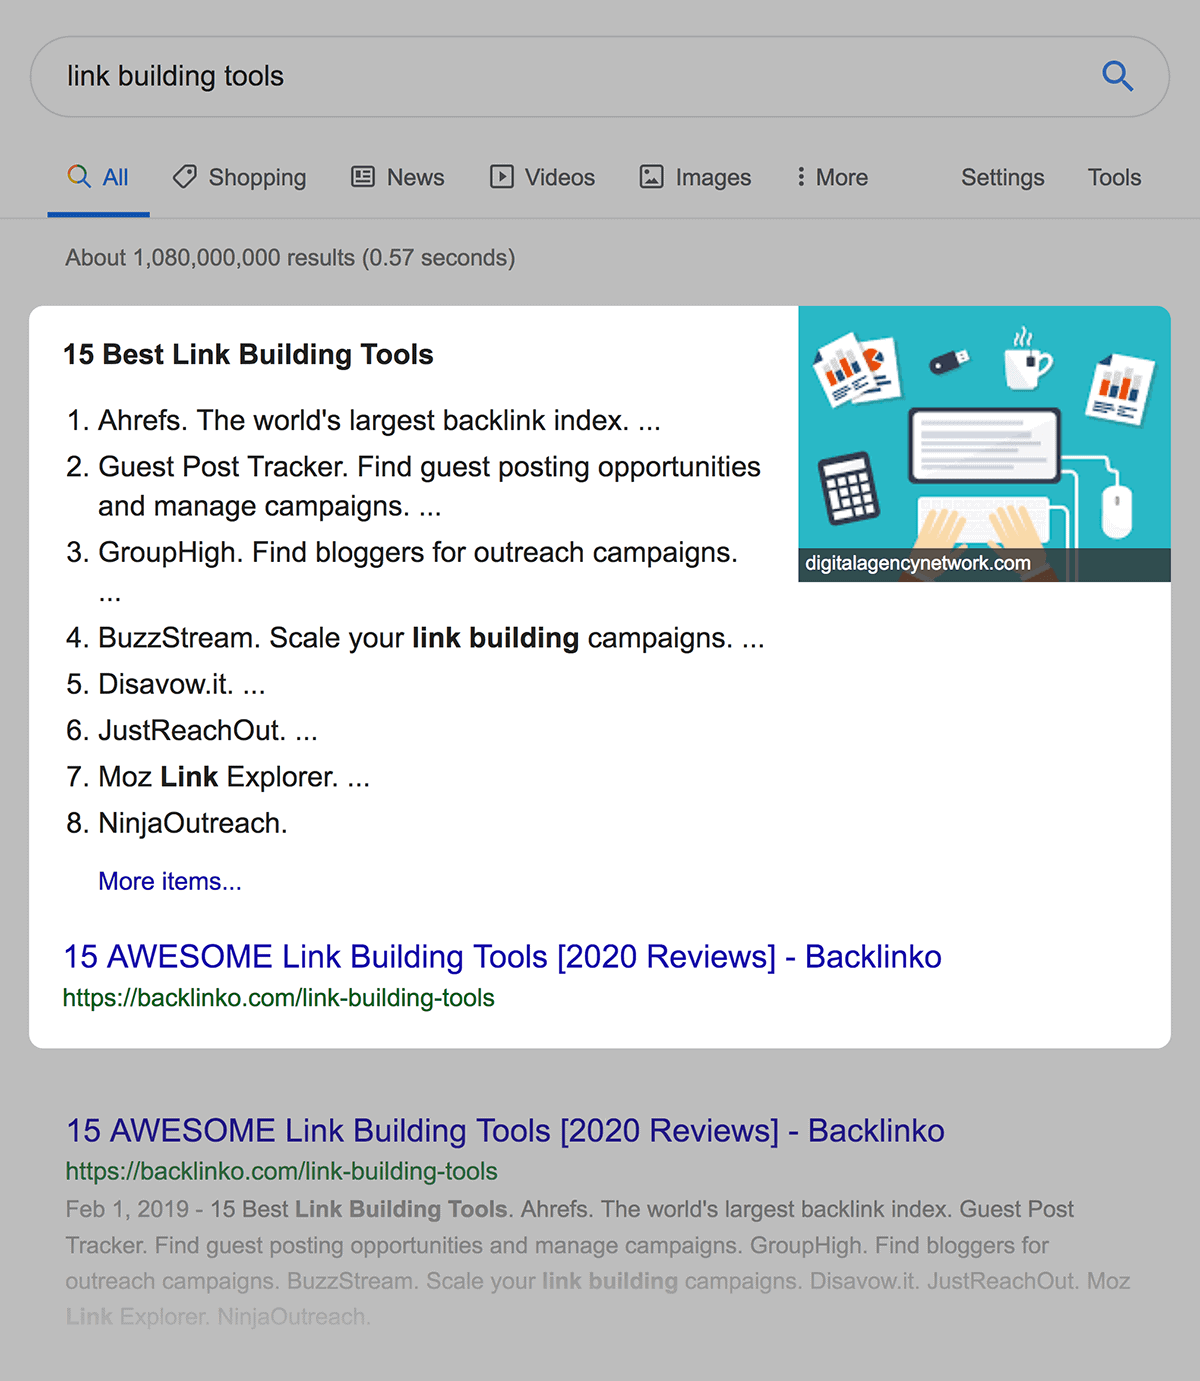 link building tools post featured snippet